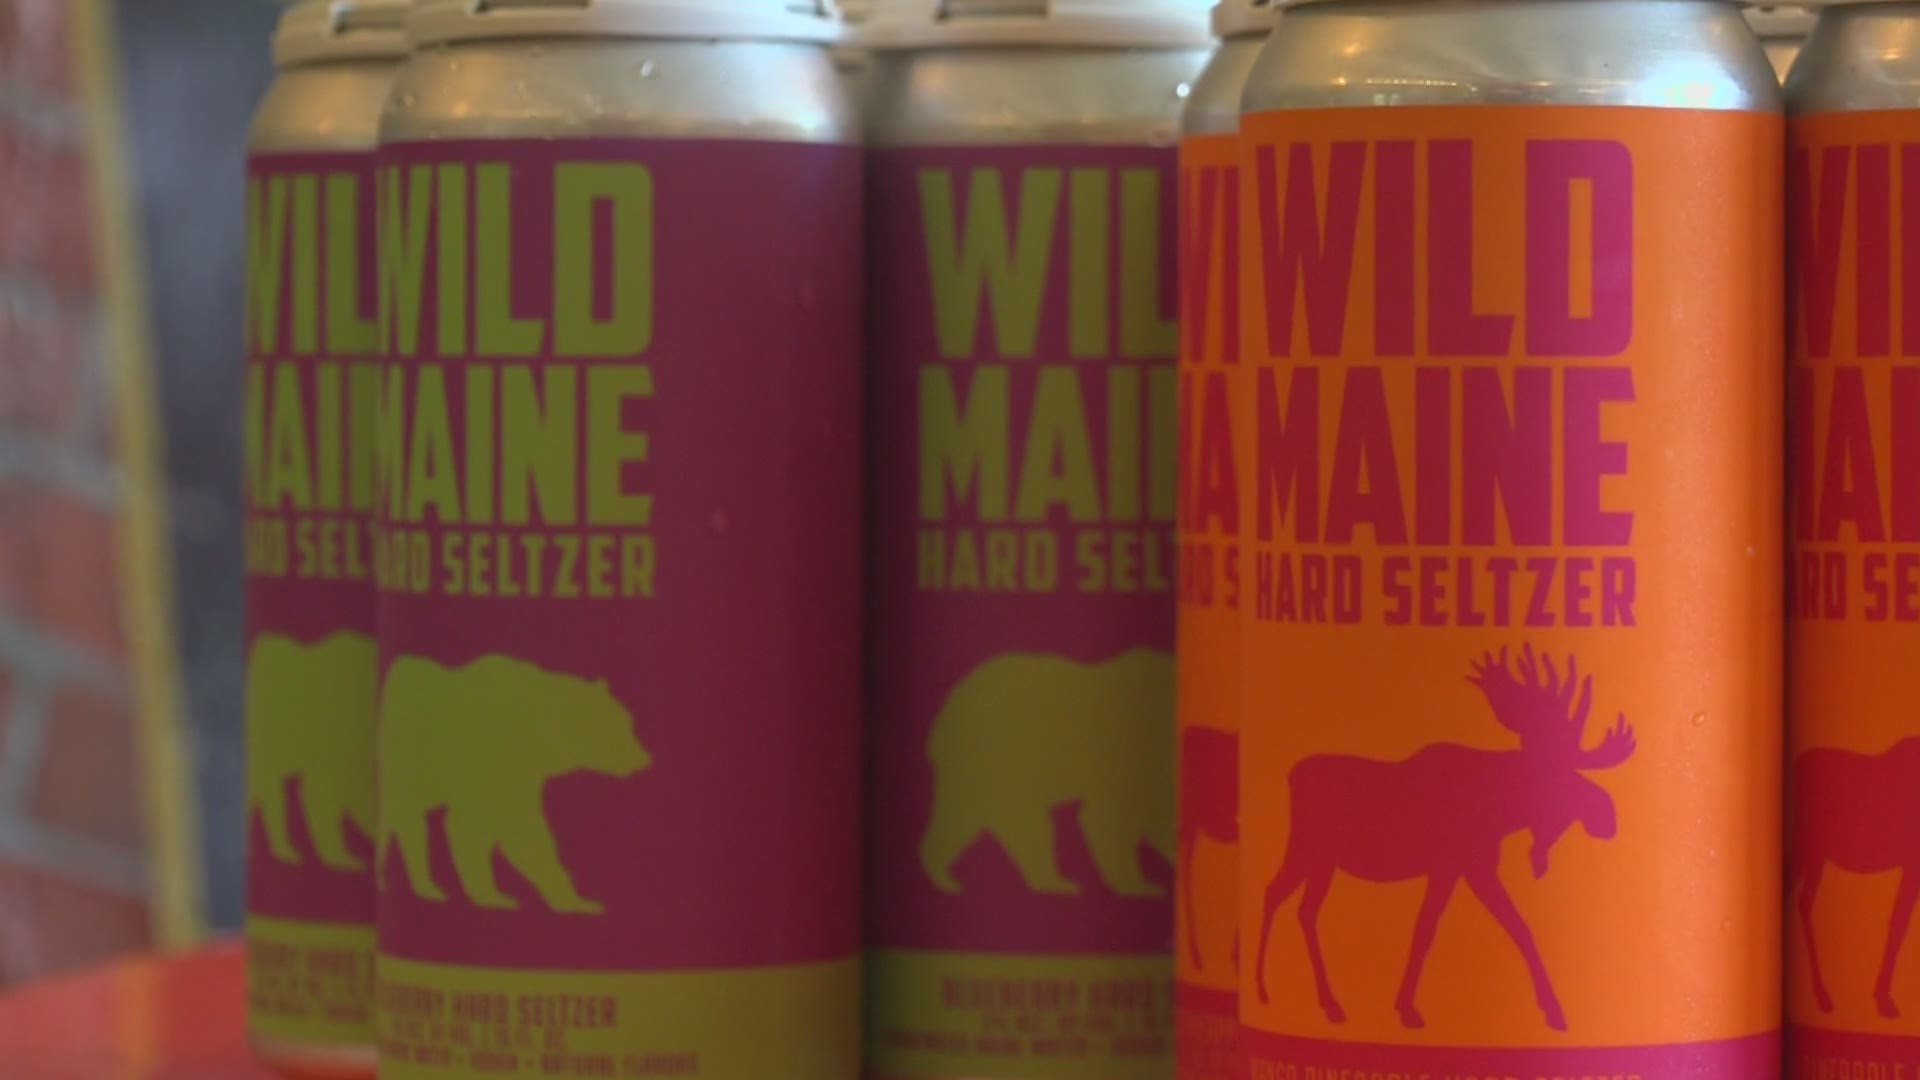 Each flavor of hard seltzer has it's own iconic Maine logo including the lobster, the moose and the black bear.